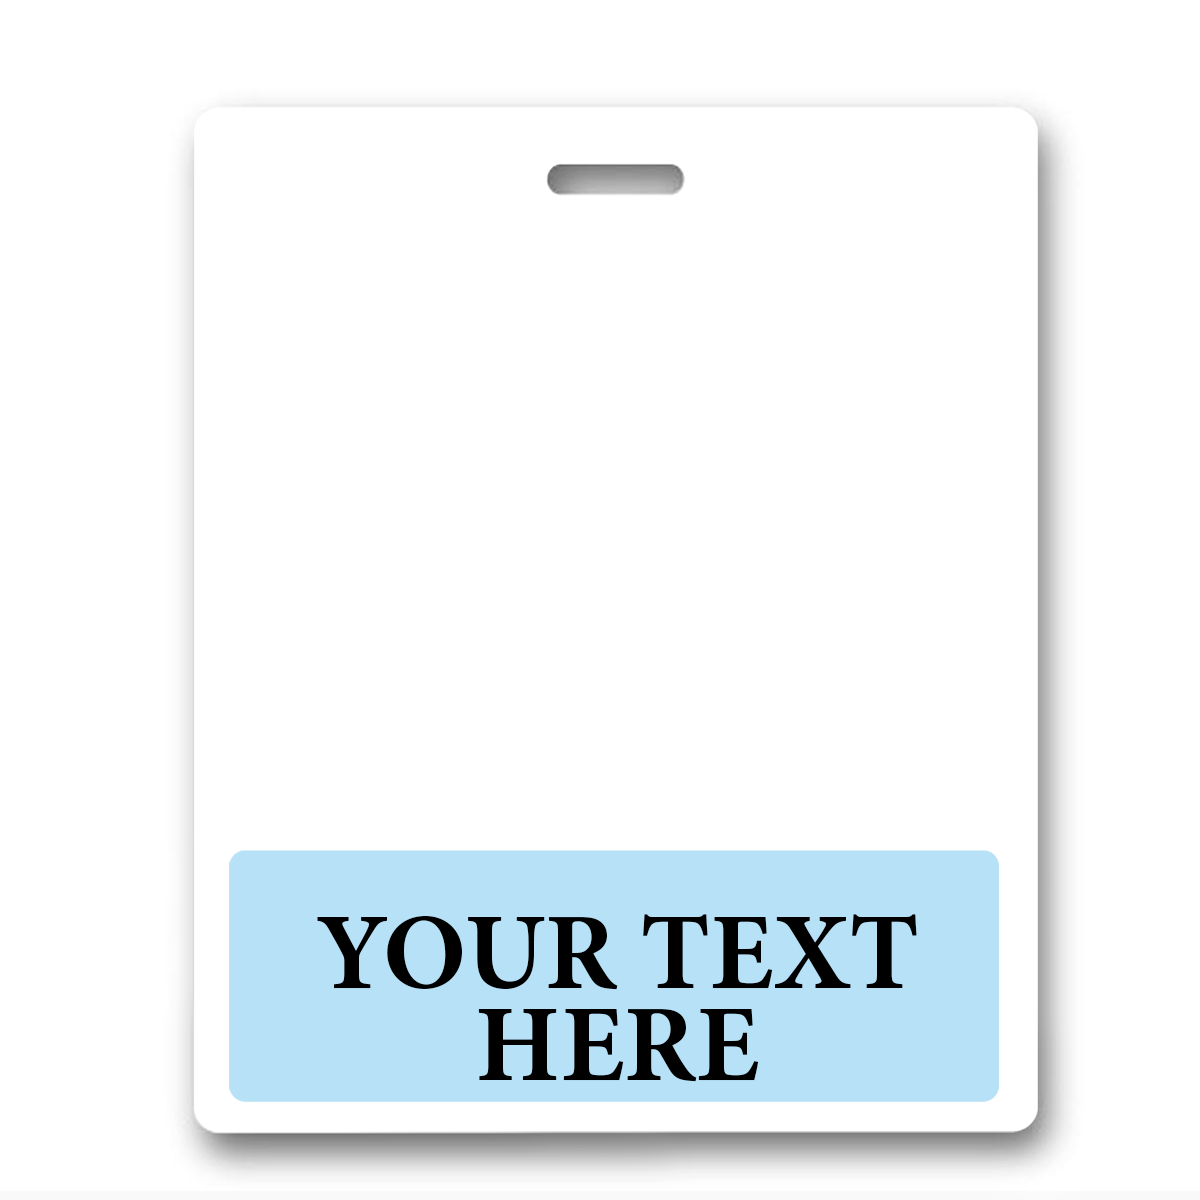 An Oversized Custom Printed Horizontal XL Badge Buddy (Extra Large Size) with a slot for attachment and a light blue section at the bottom containing the words "YOUR TEXT HERE" in black text, perfect for creating Custom Badge Buddies that stand out.